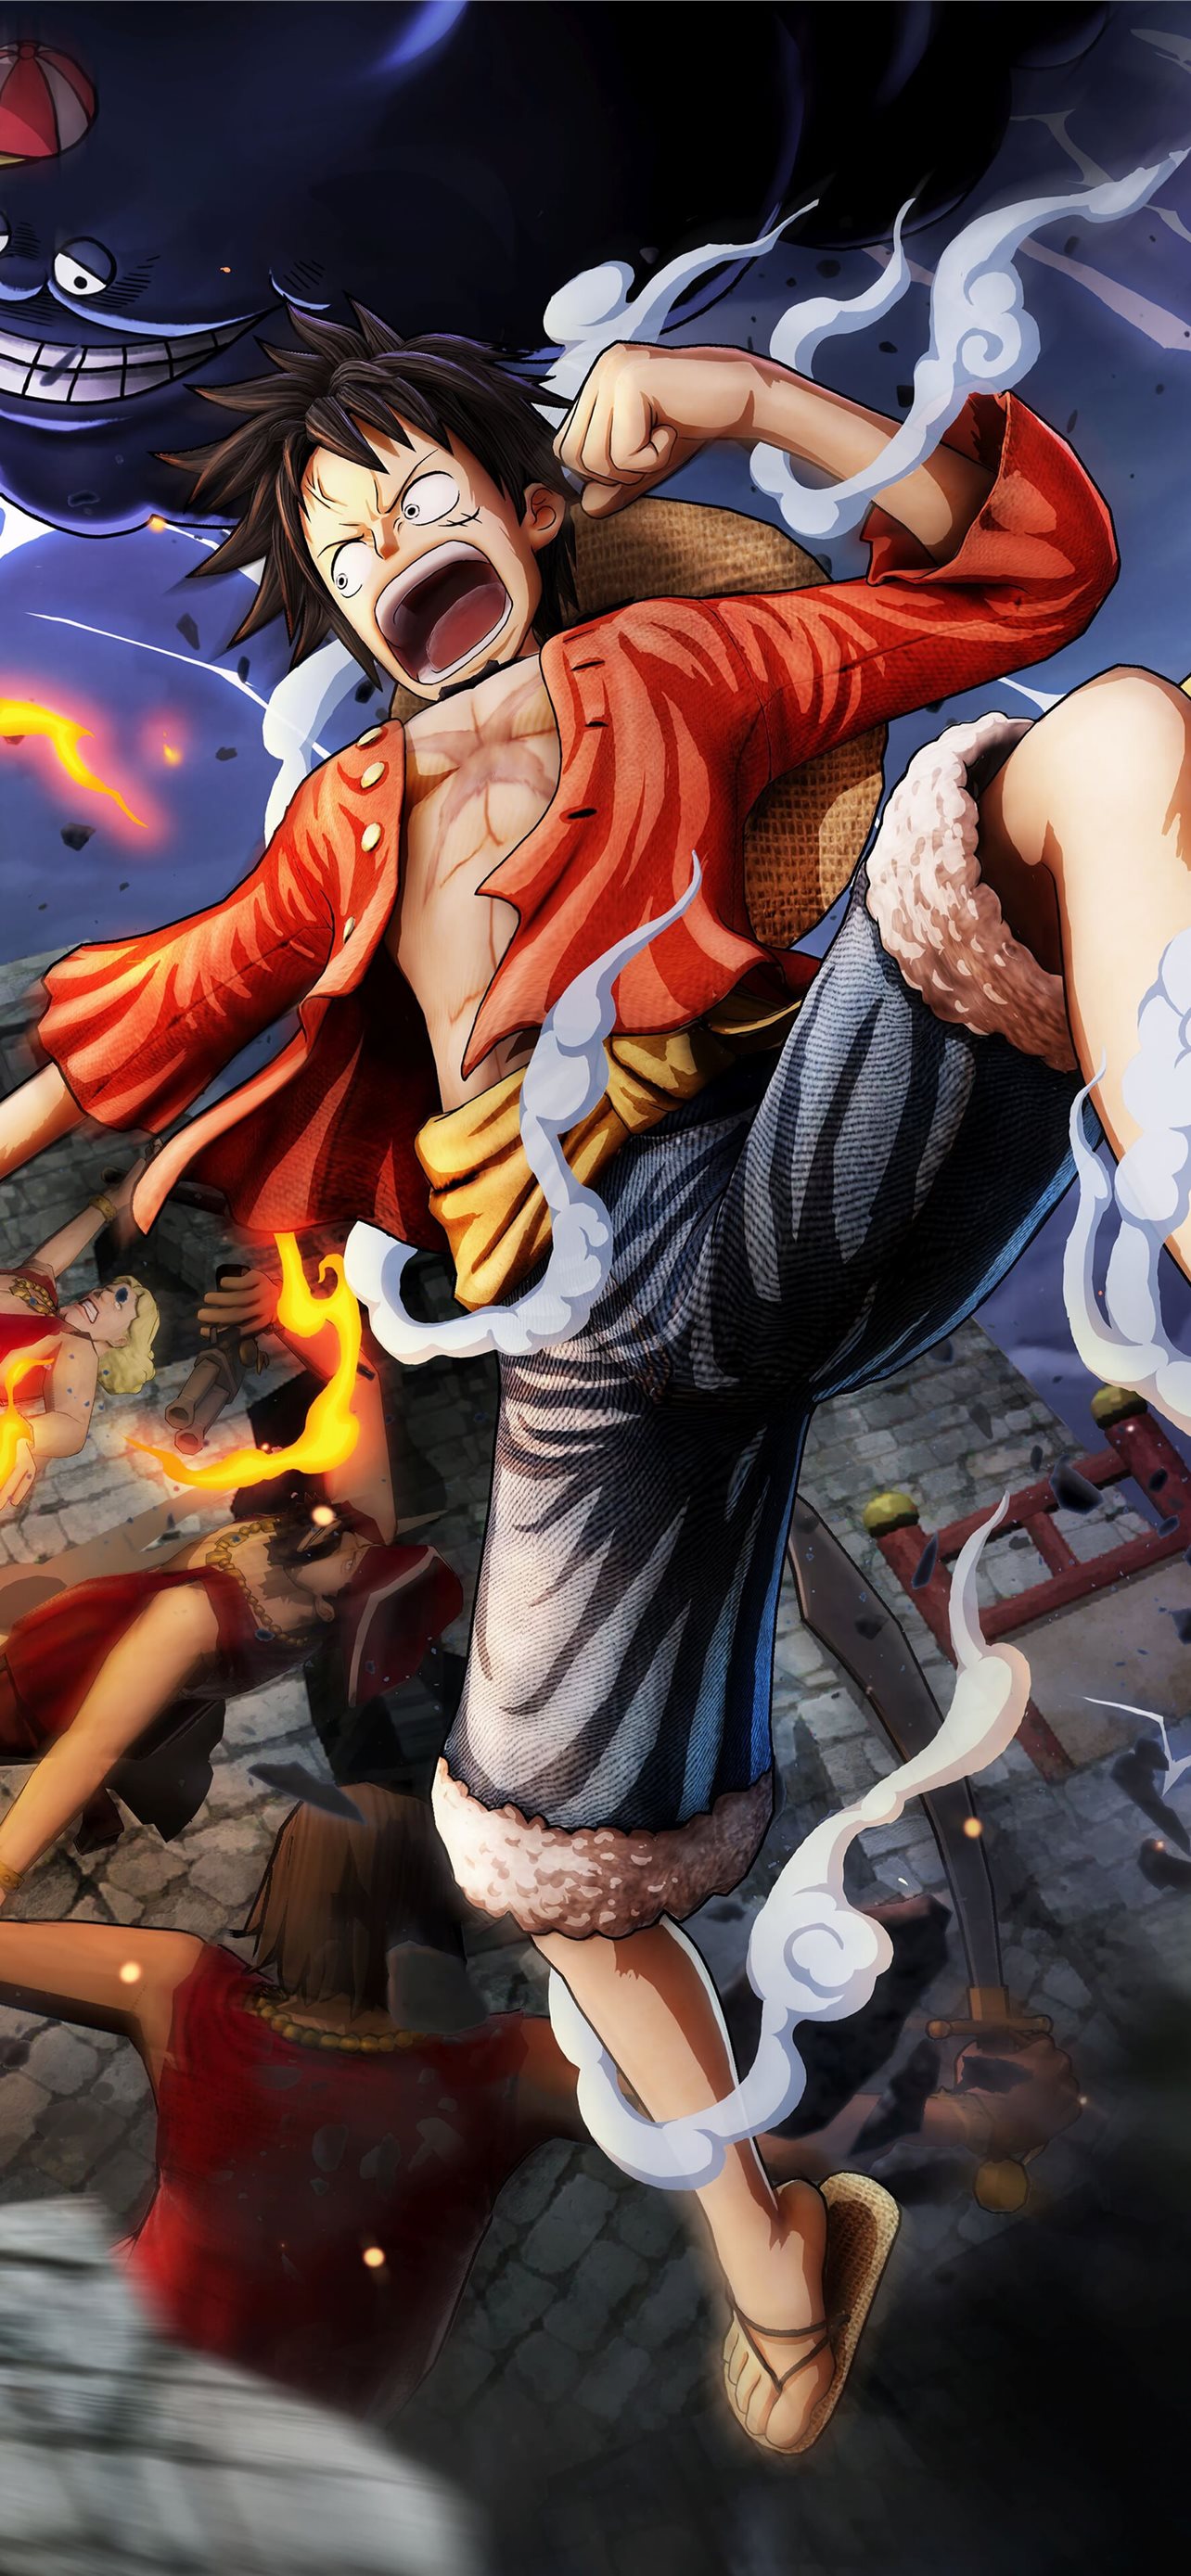 Anime One Piece KoLPaPer Awesome Free HD iPhone wallpaper 